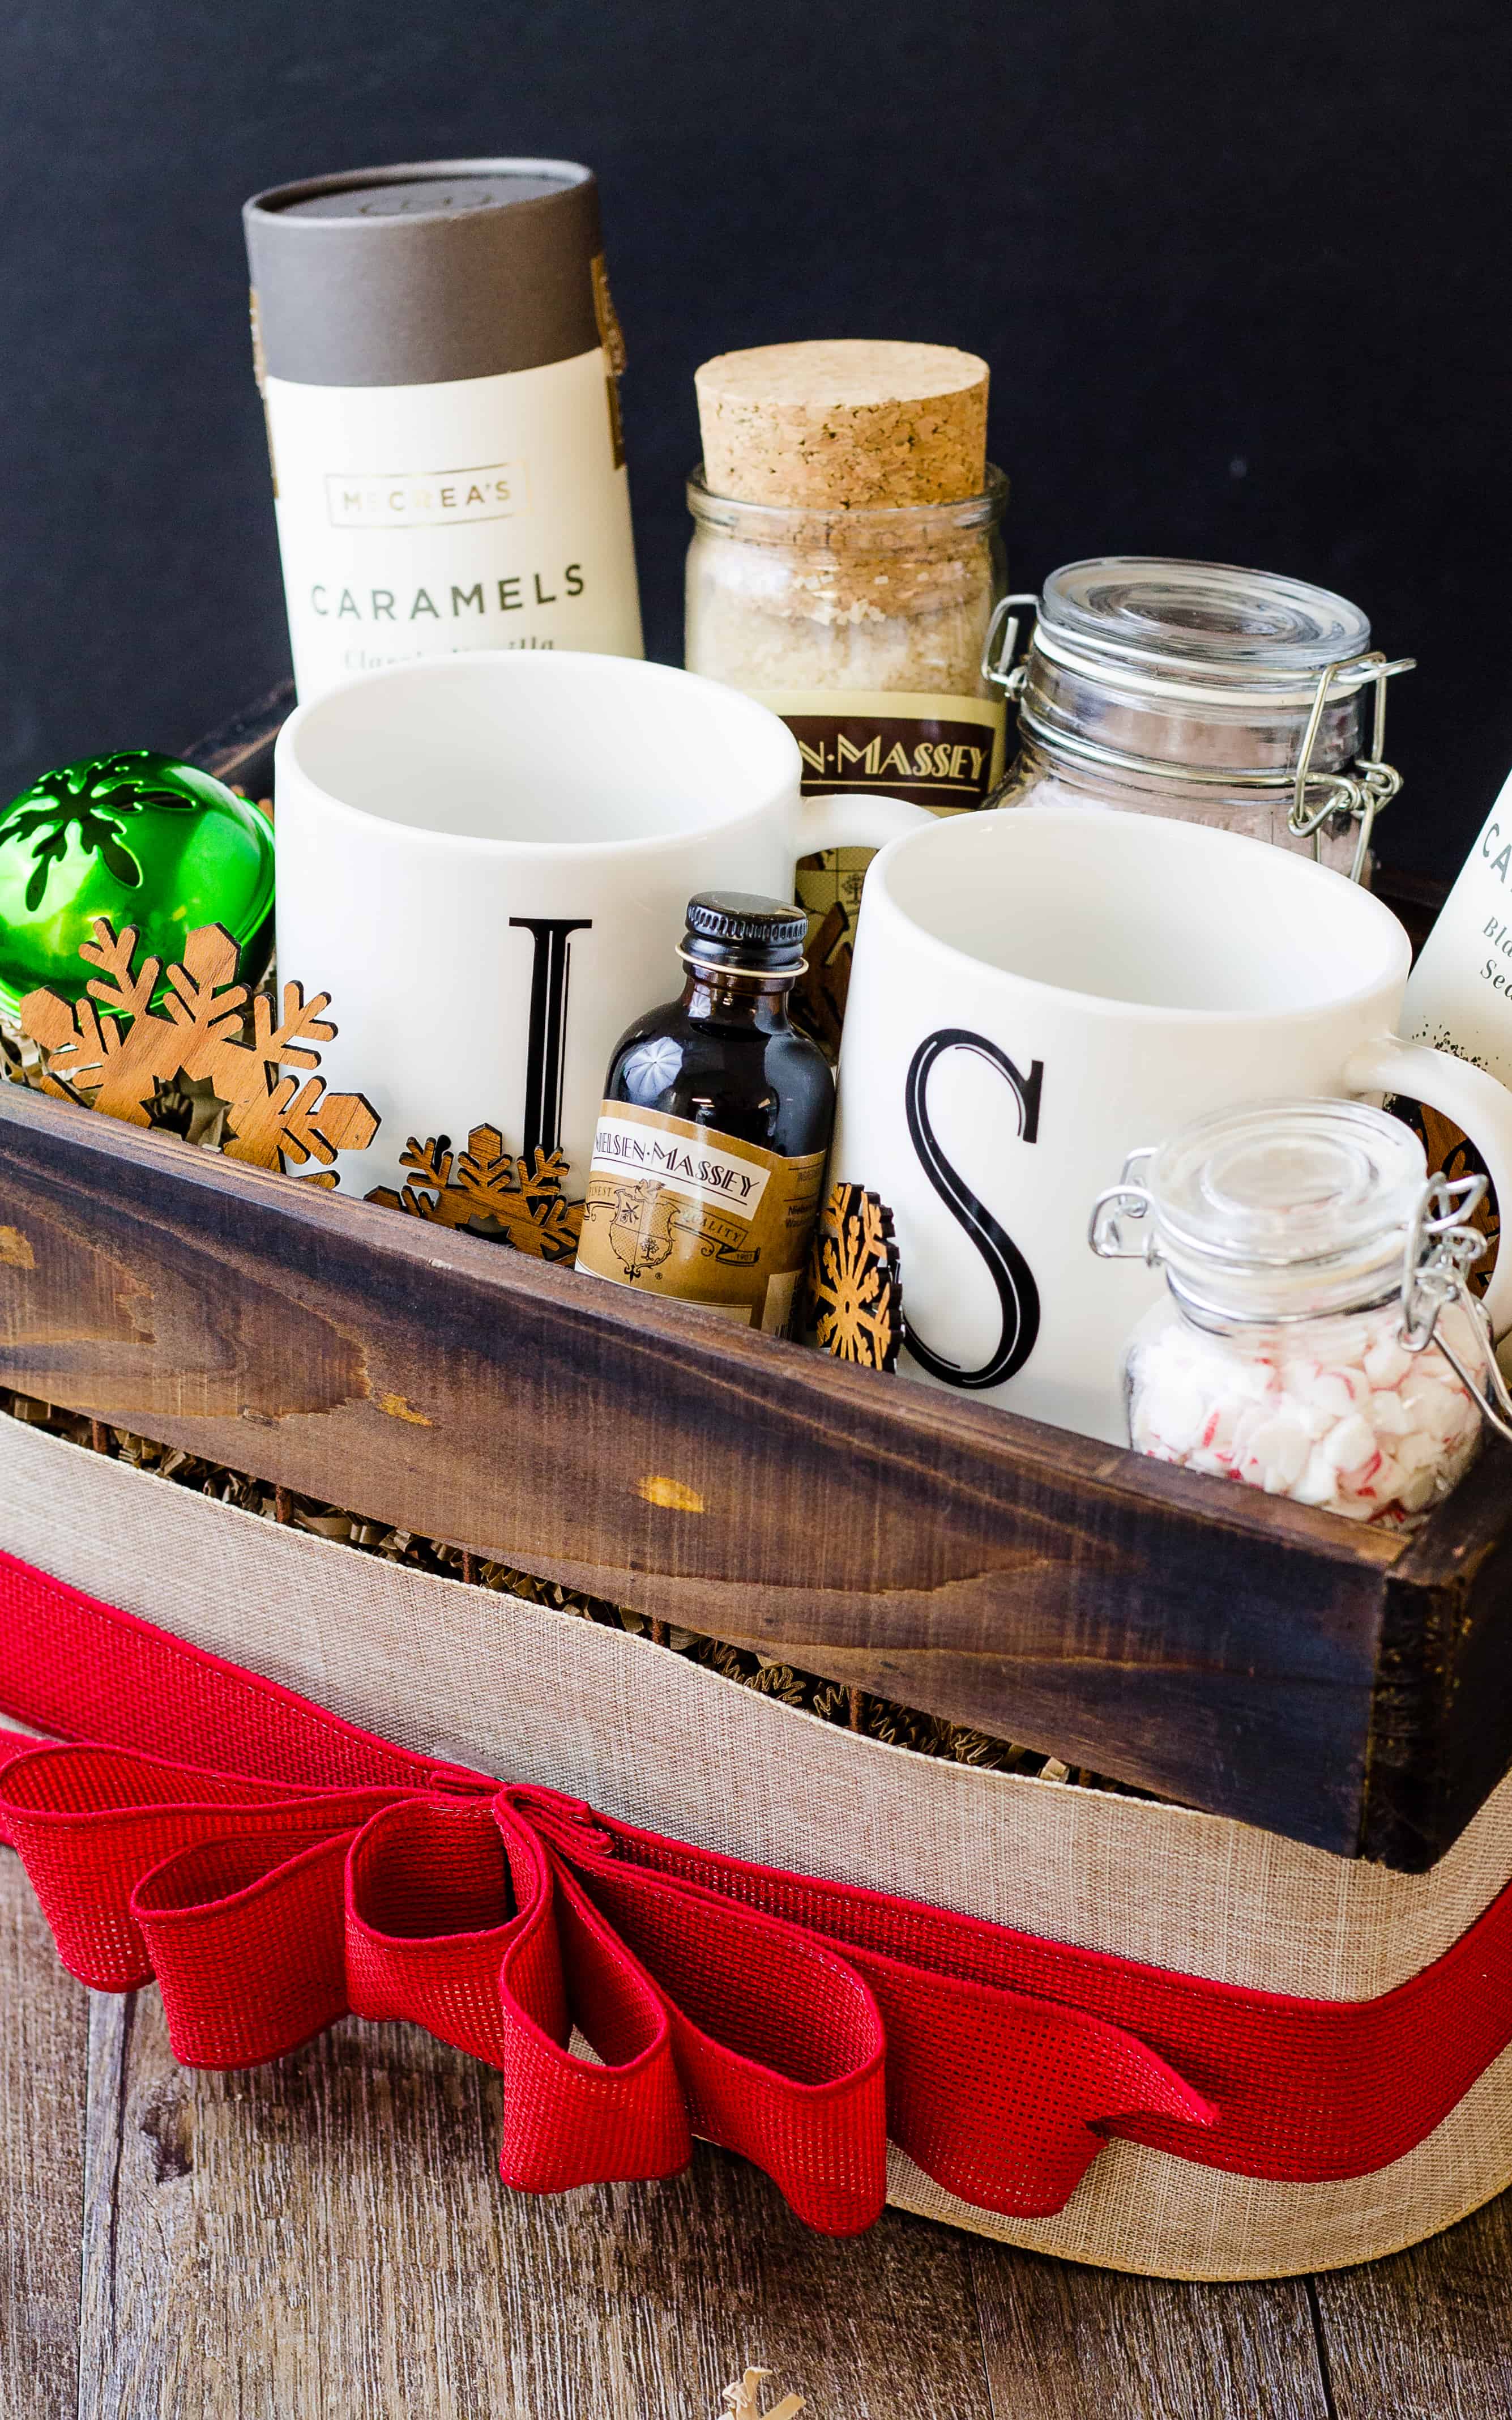 A special holiday gift! Gift Wrapping Get Away Gift Basket | Take Two Tapas | #CocoaMocha #Holidays #GiftBasket #Gifts #HostessGift #Caramels #AD